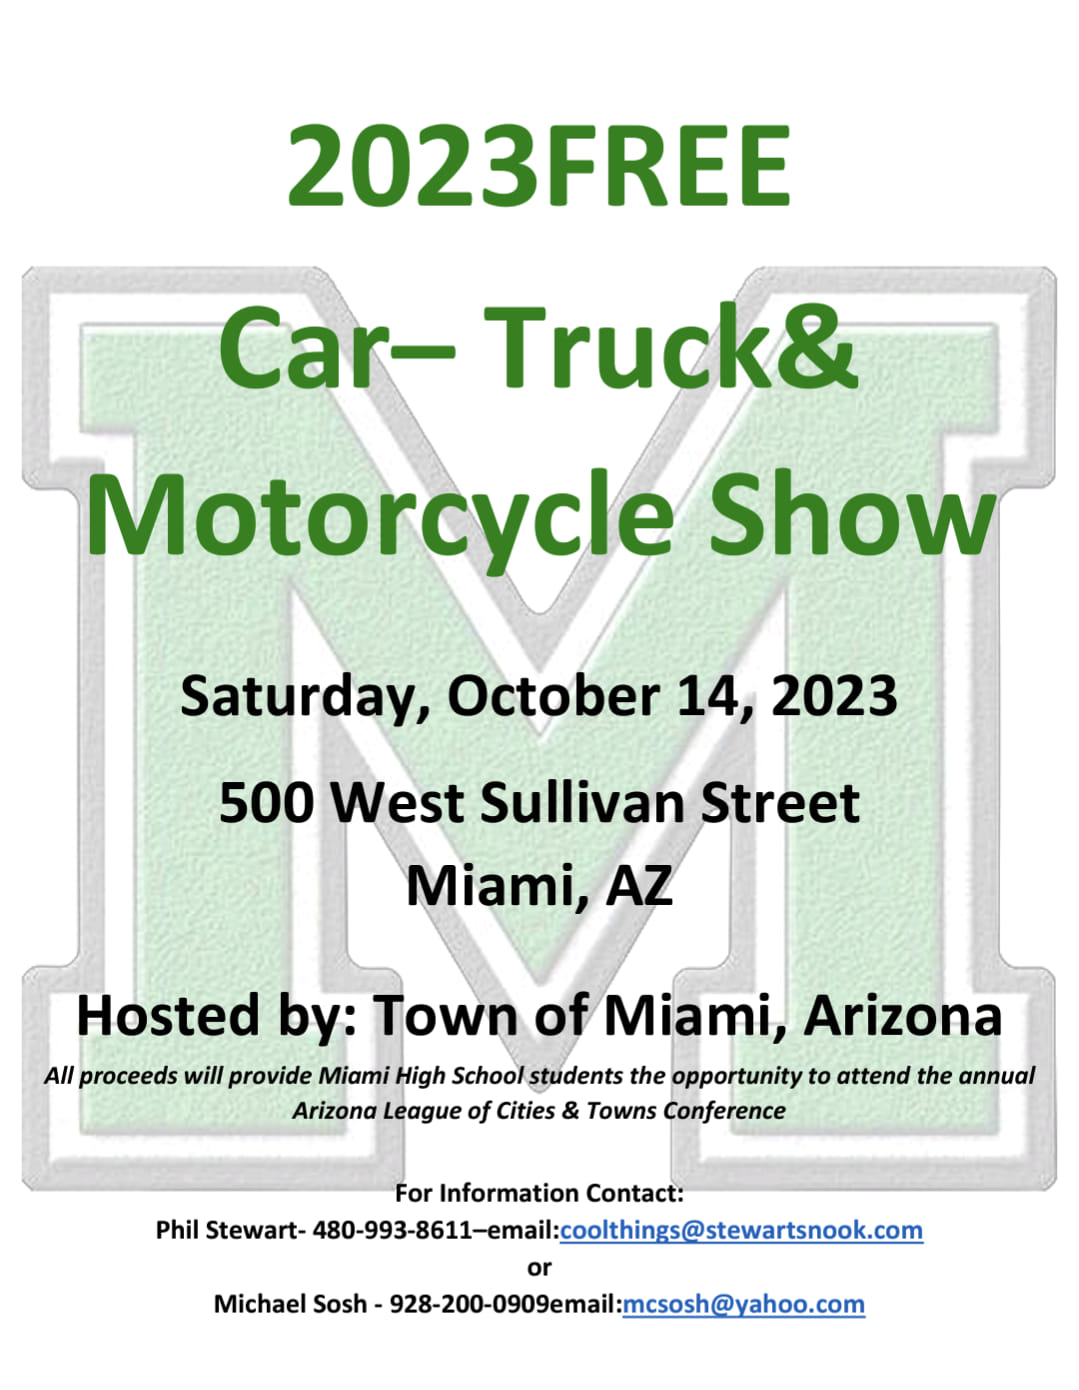 Miami Car, Truck & Motorcycle Show